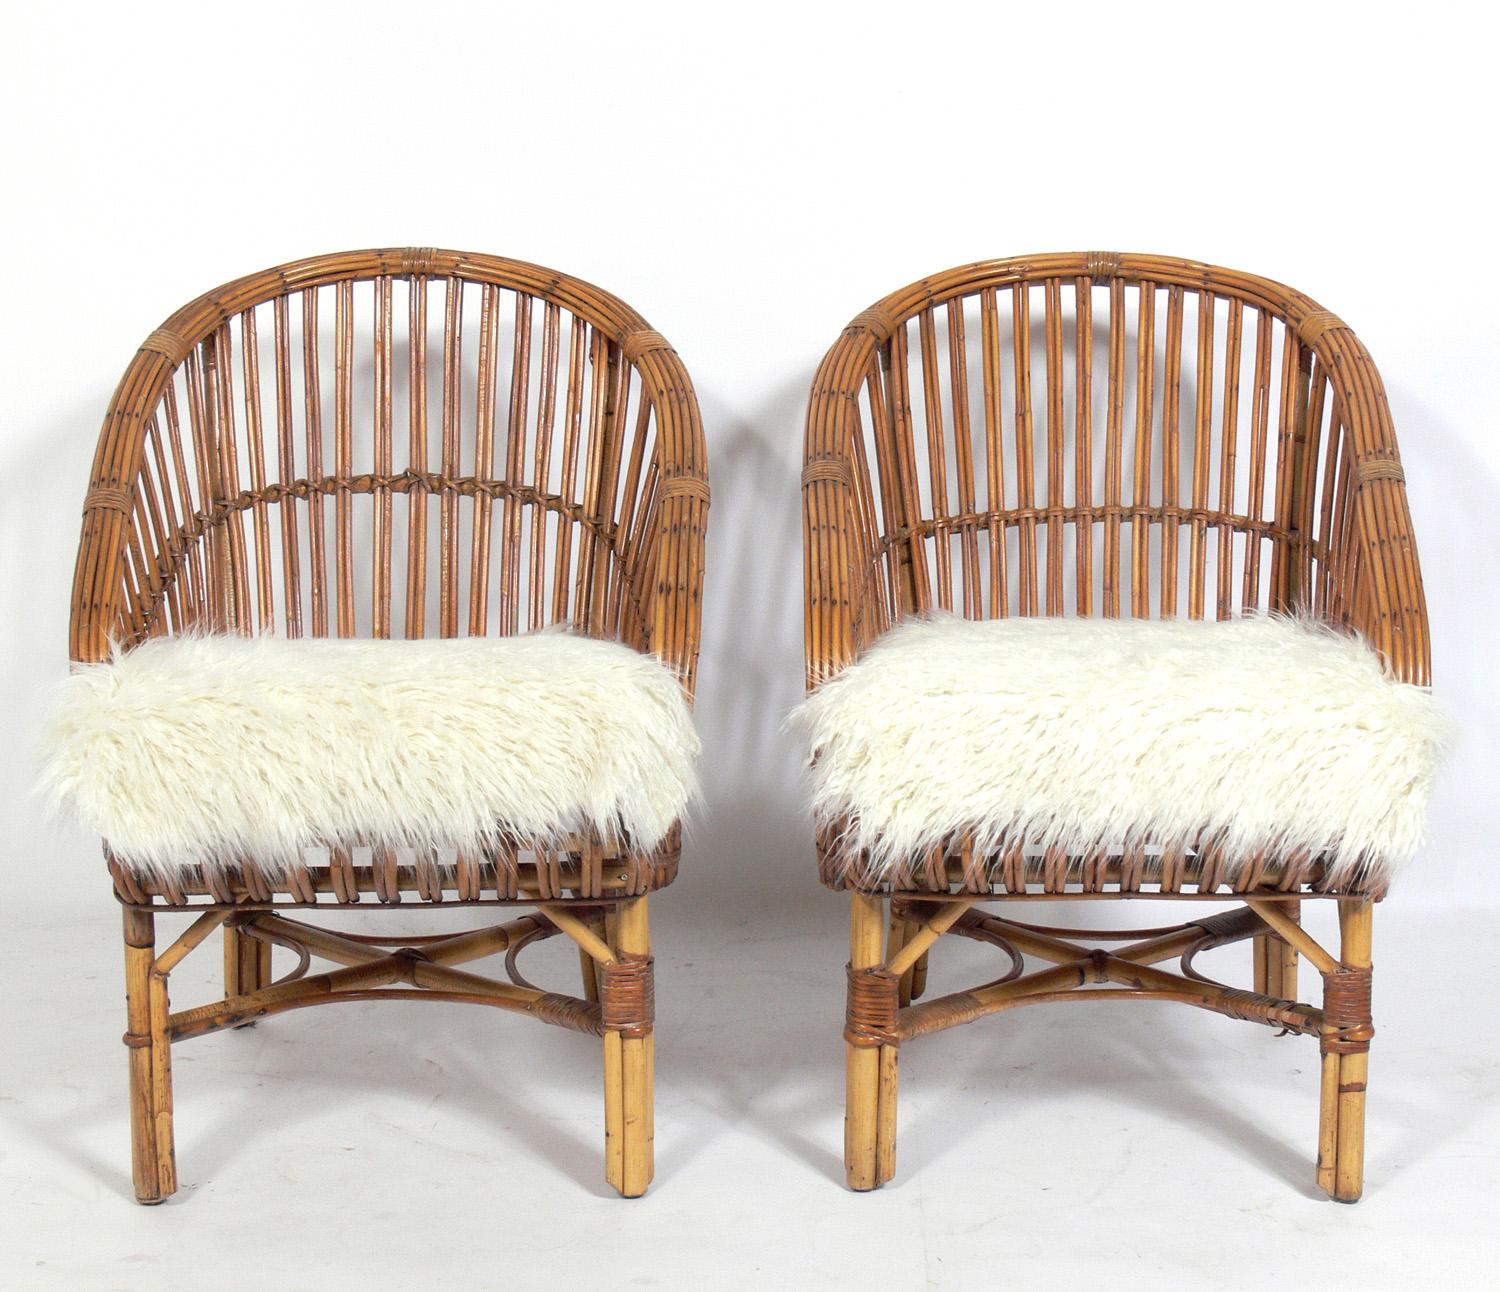 Pair of Curvaceous Rattan chairs, in the manner of Franco Albini, probably Italian, circa 1950s. They have been reupholstered in an ivory color herringbone upholstery and they include the faux sheepskin throws.